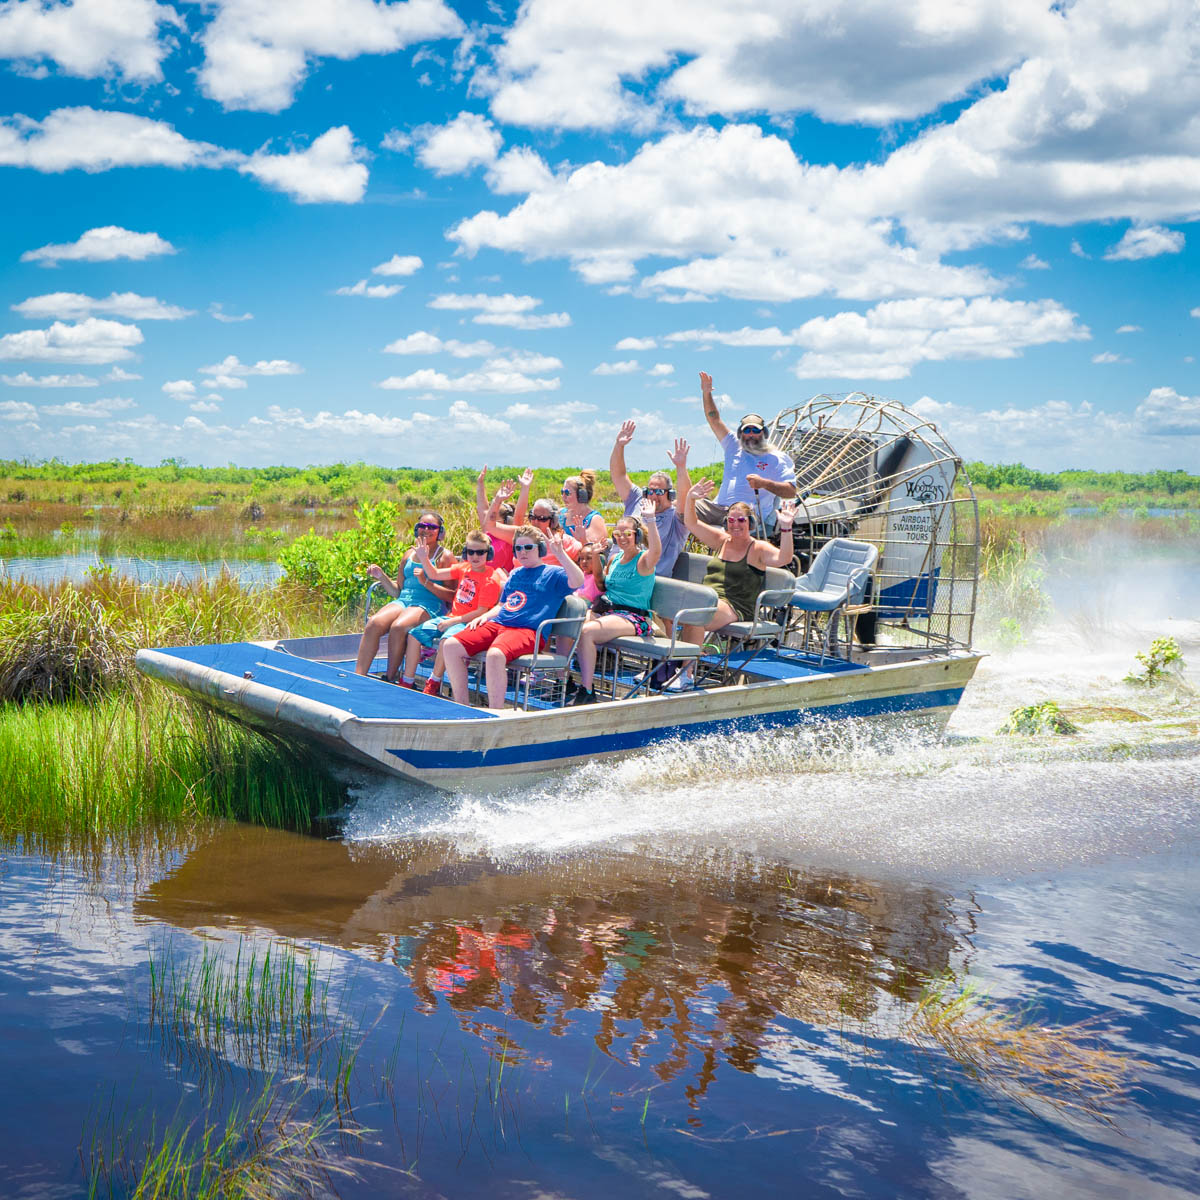 airboat tour near marco island